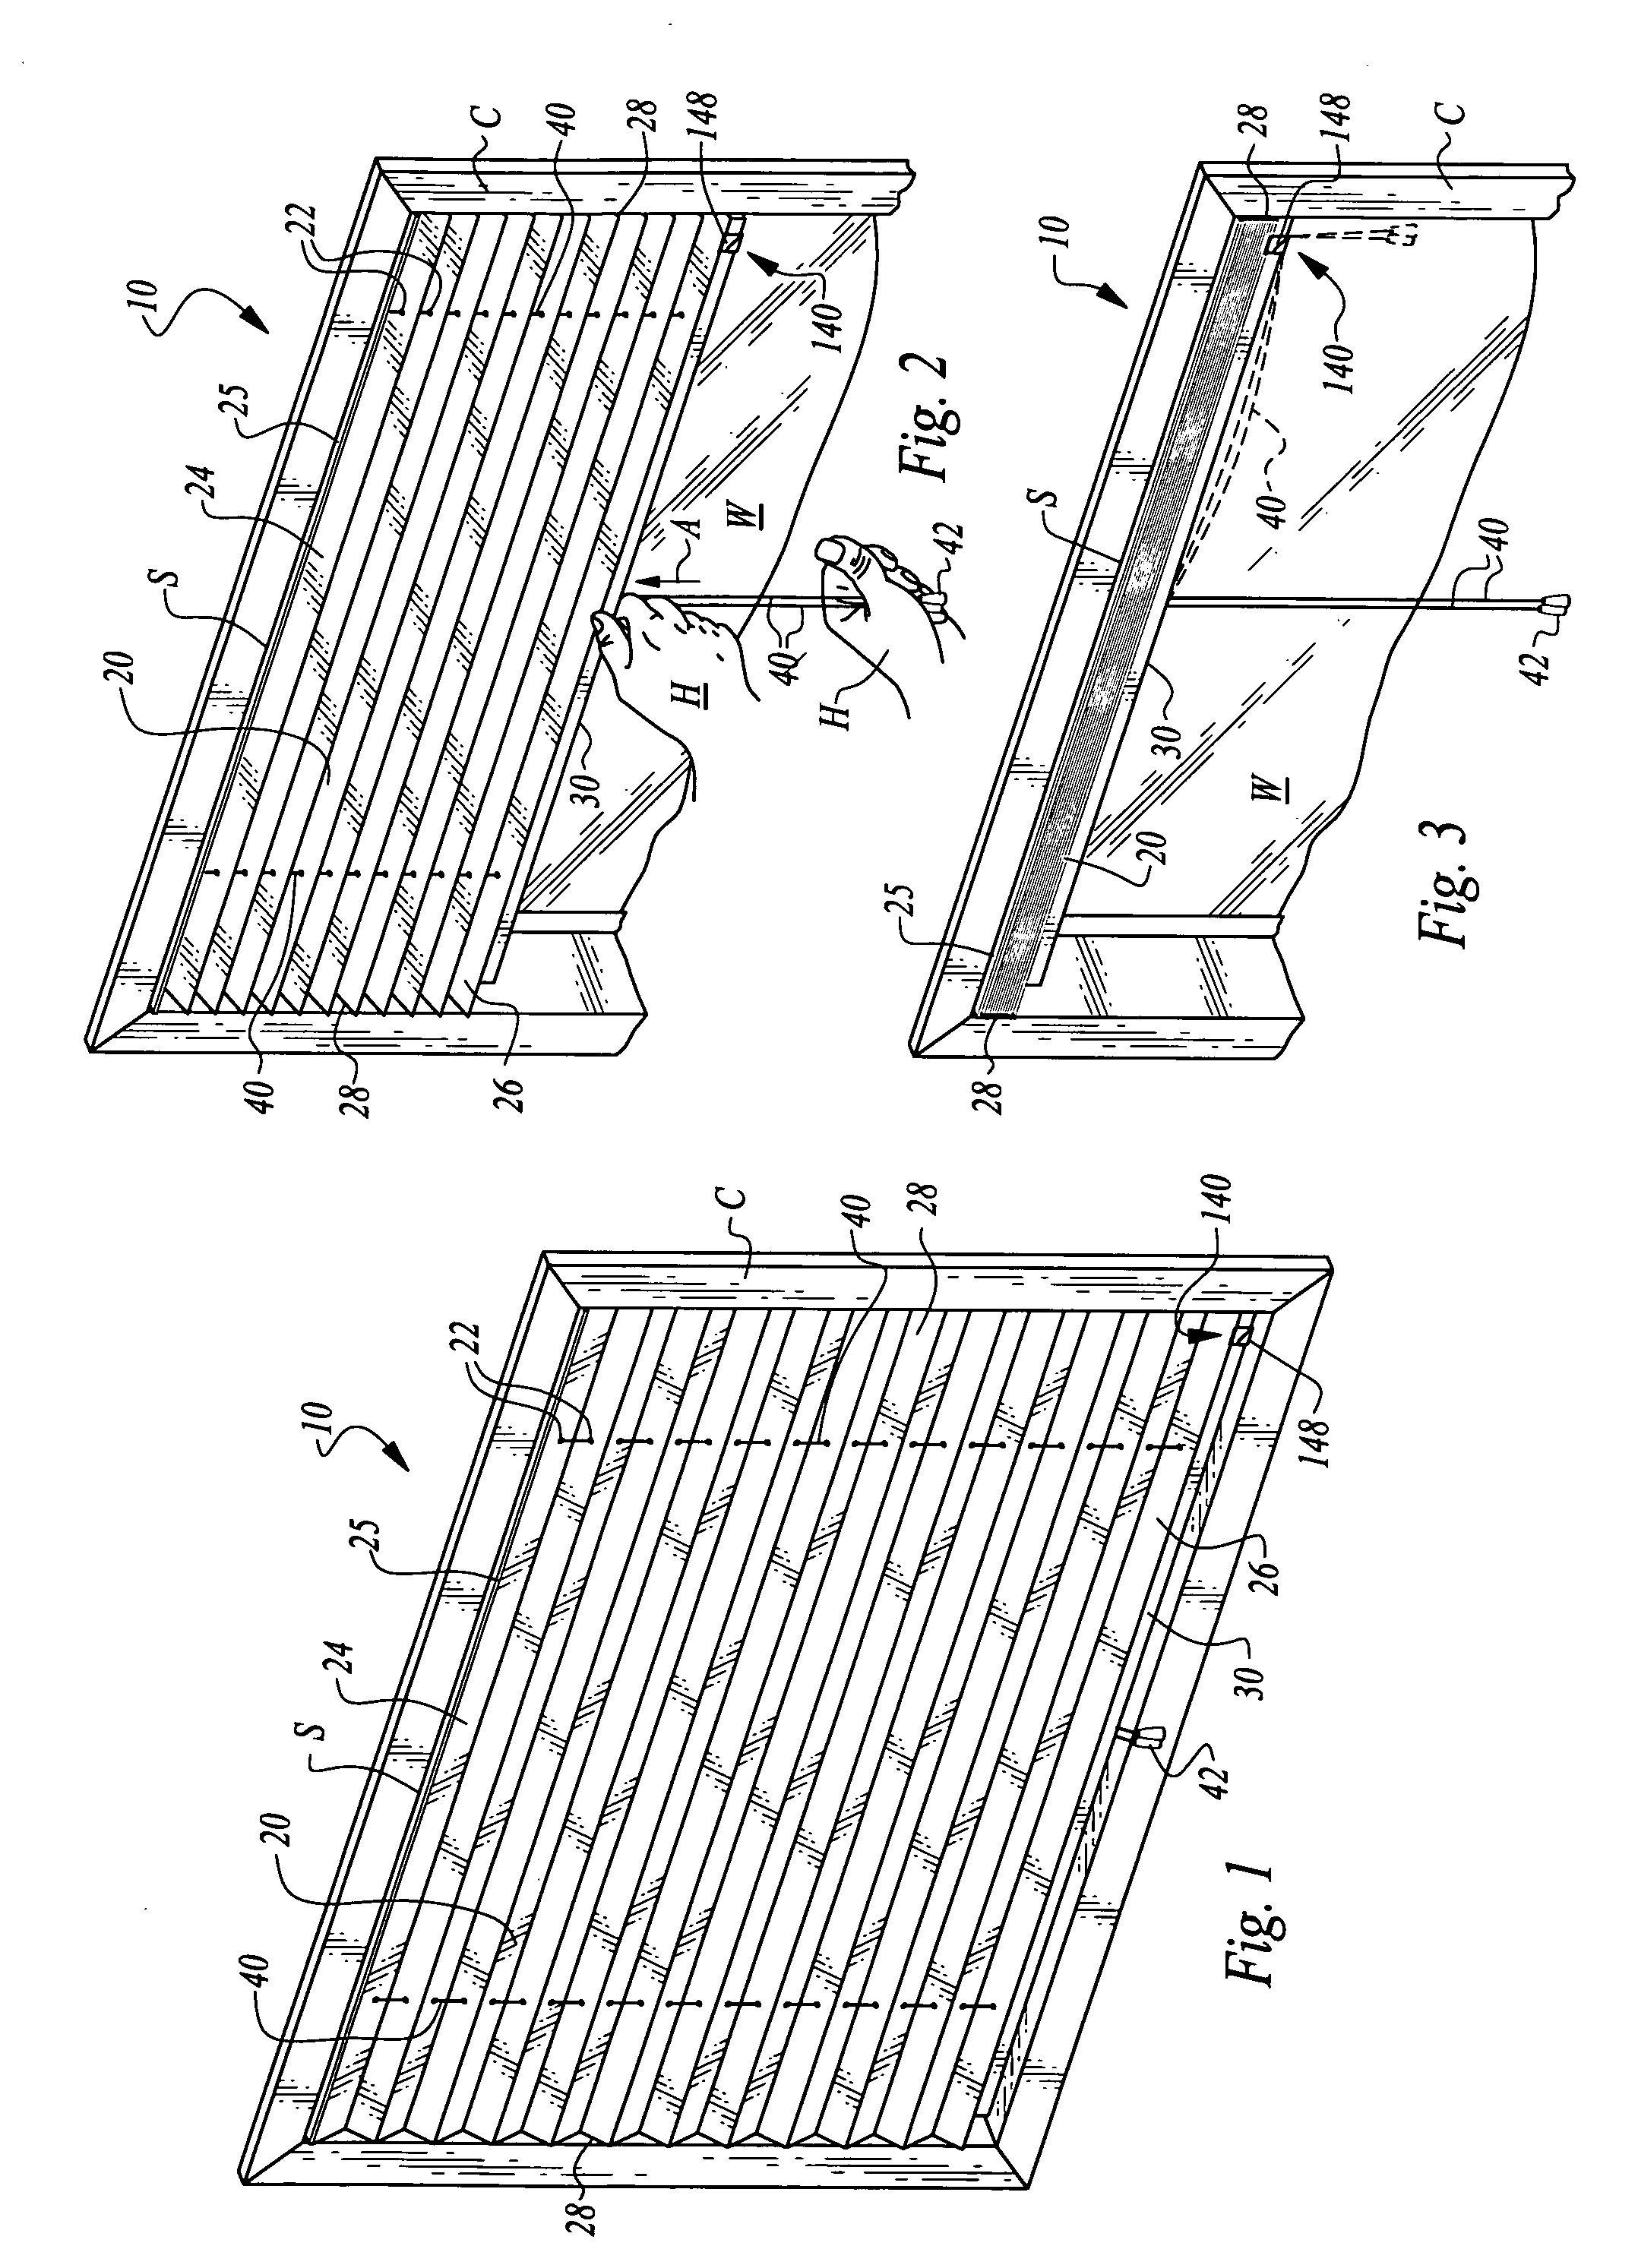 Window covering with constant lifting cord friction